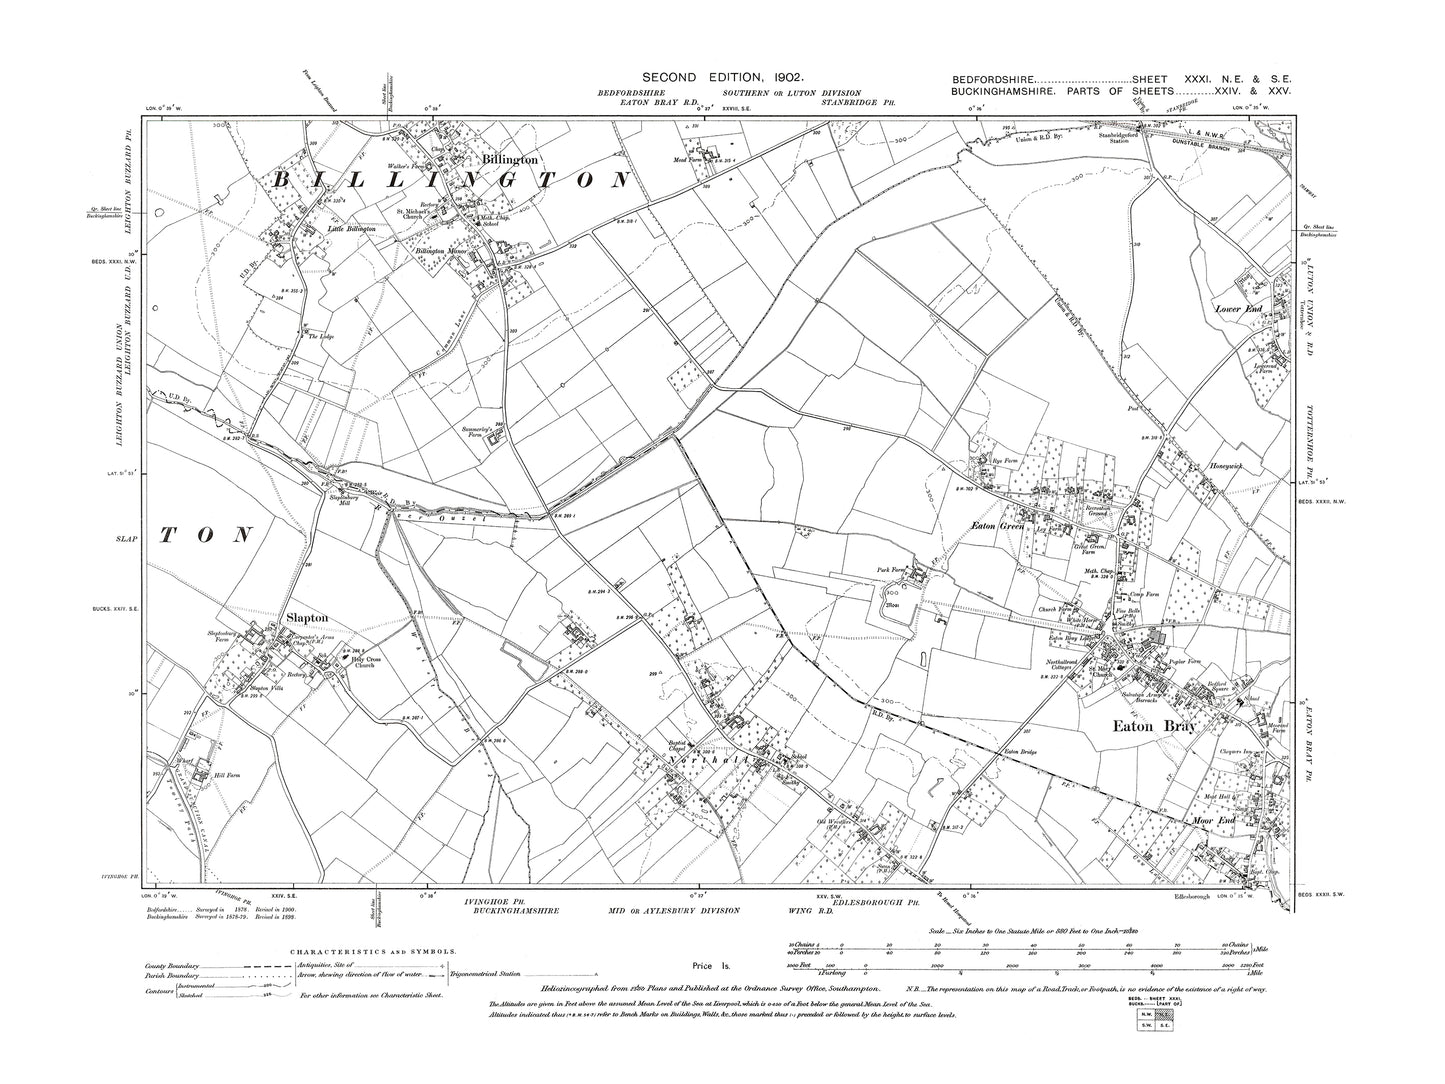 A 1902 map showing Billington and Eaton Bray (west) in Bedfordshire - A Digital Download 0f OS 1:10560 scale map, Beds 31NE-SE